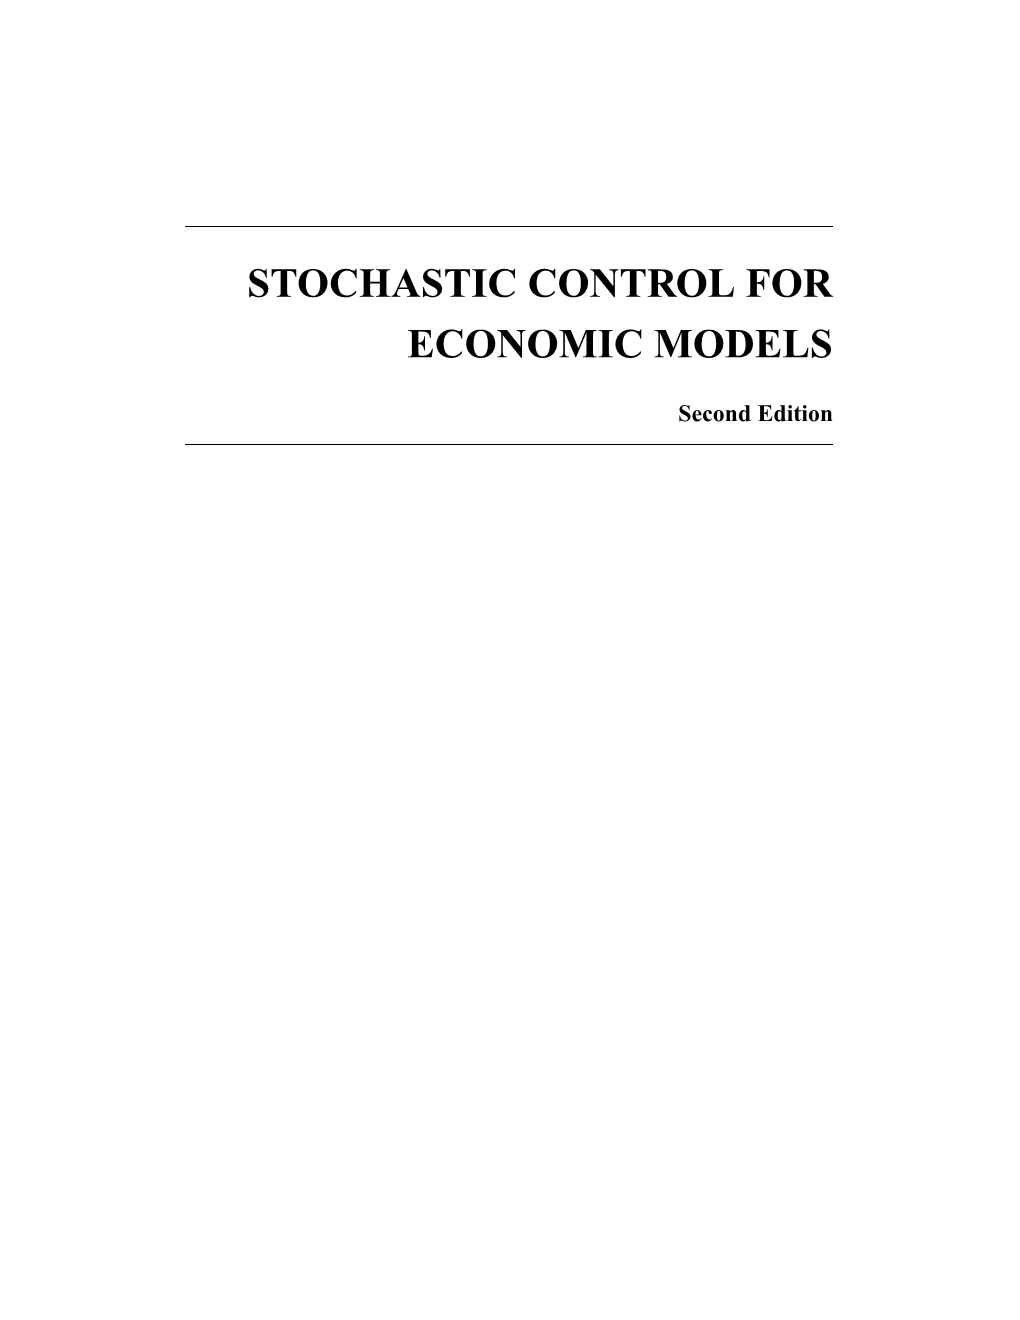 Stochastic Control for Economic Models